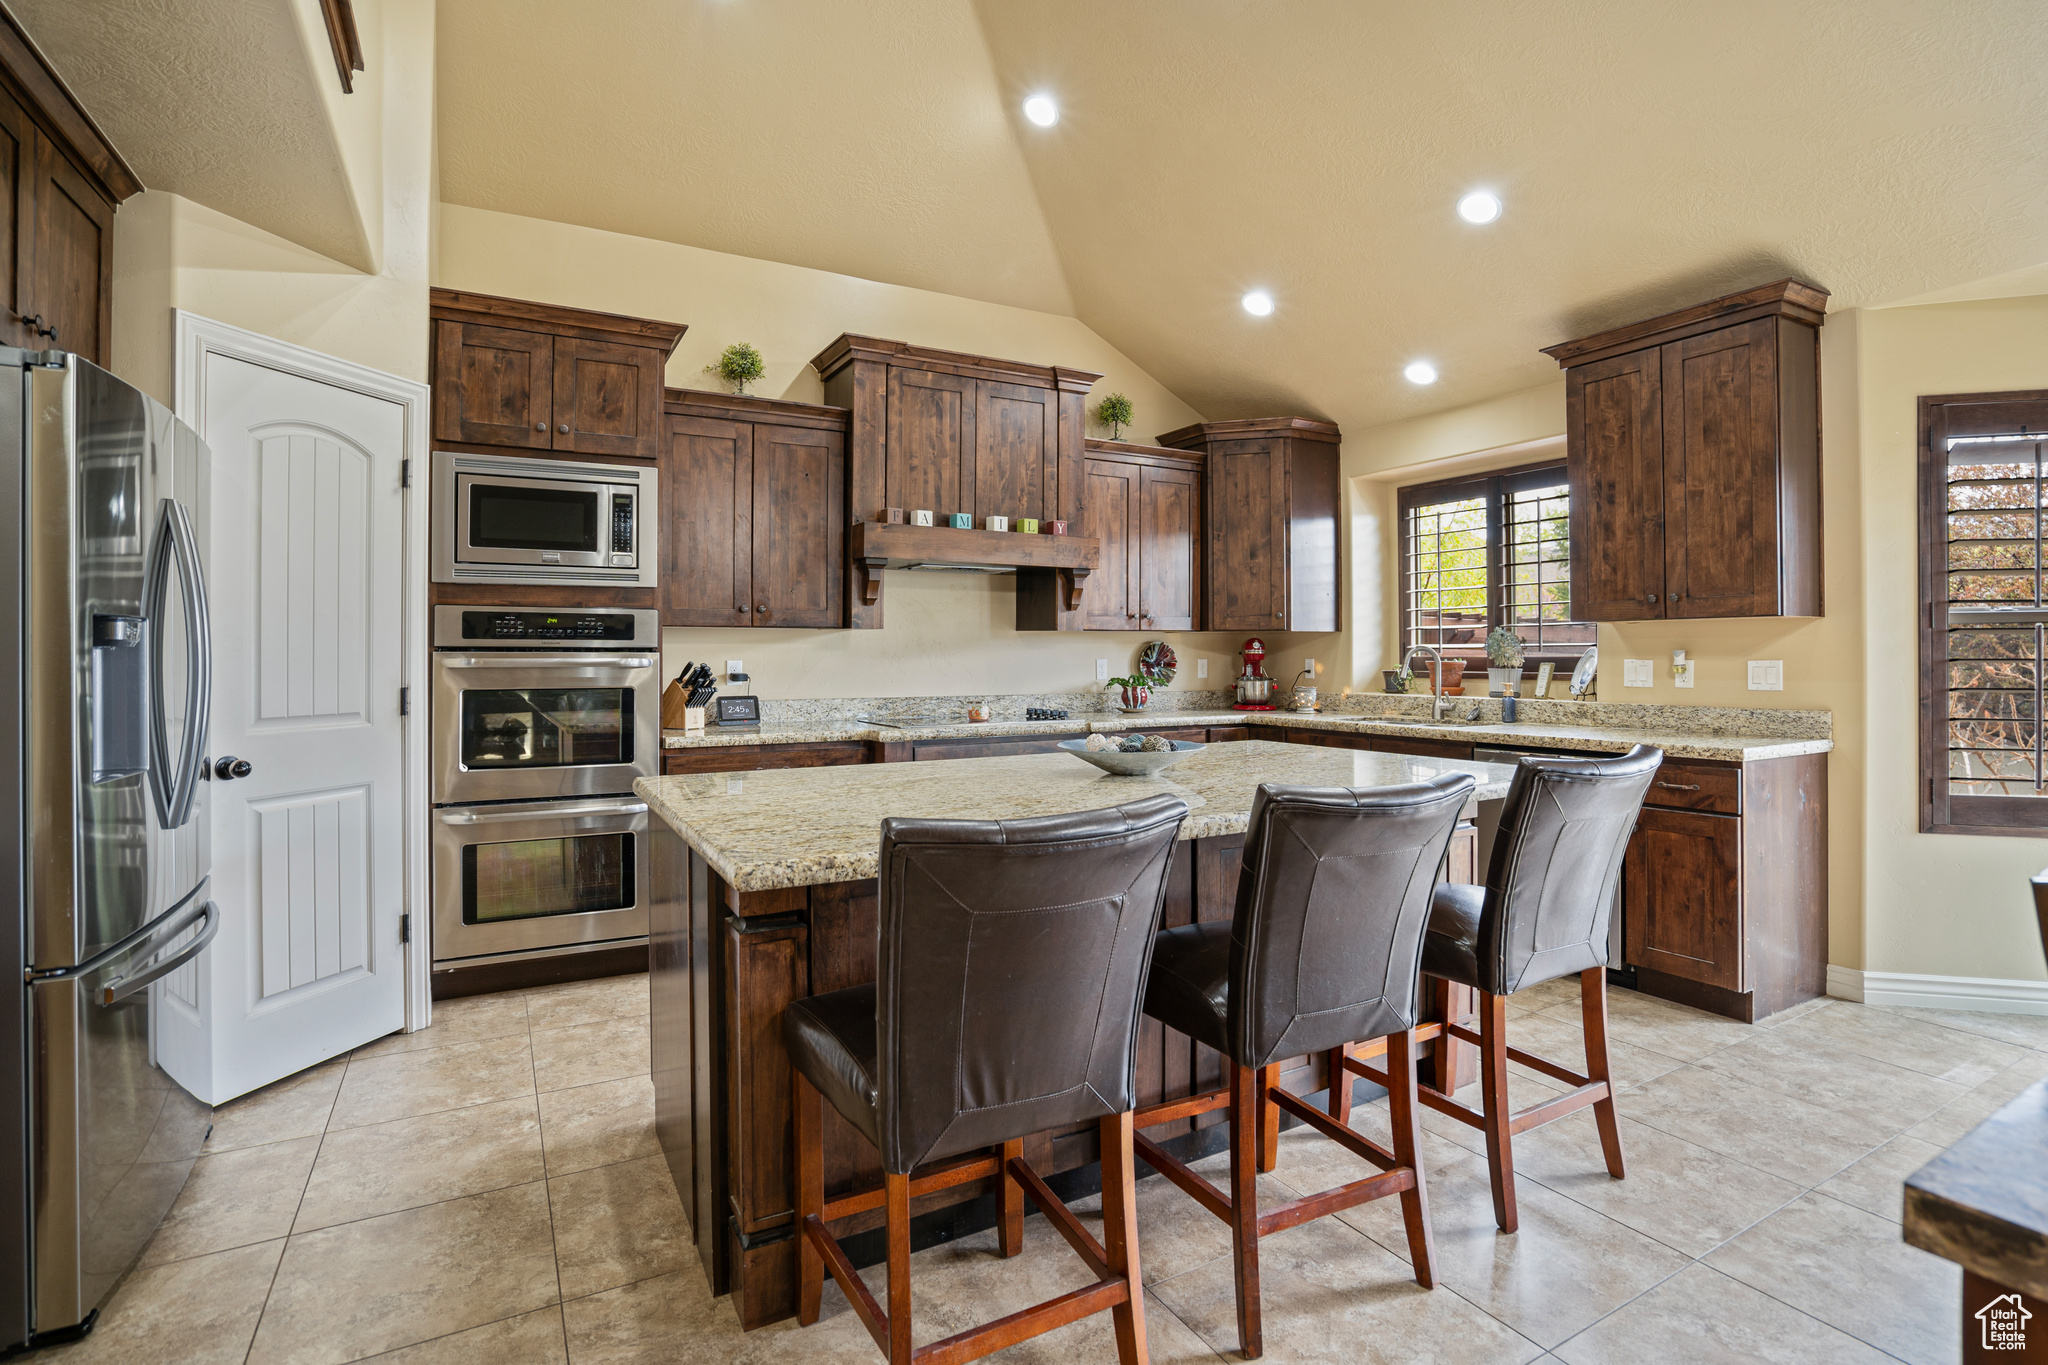 Kitchen featuring light stone counters, a center island, light tile floors, a kitchen bar, and stainless steel appliances